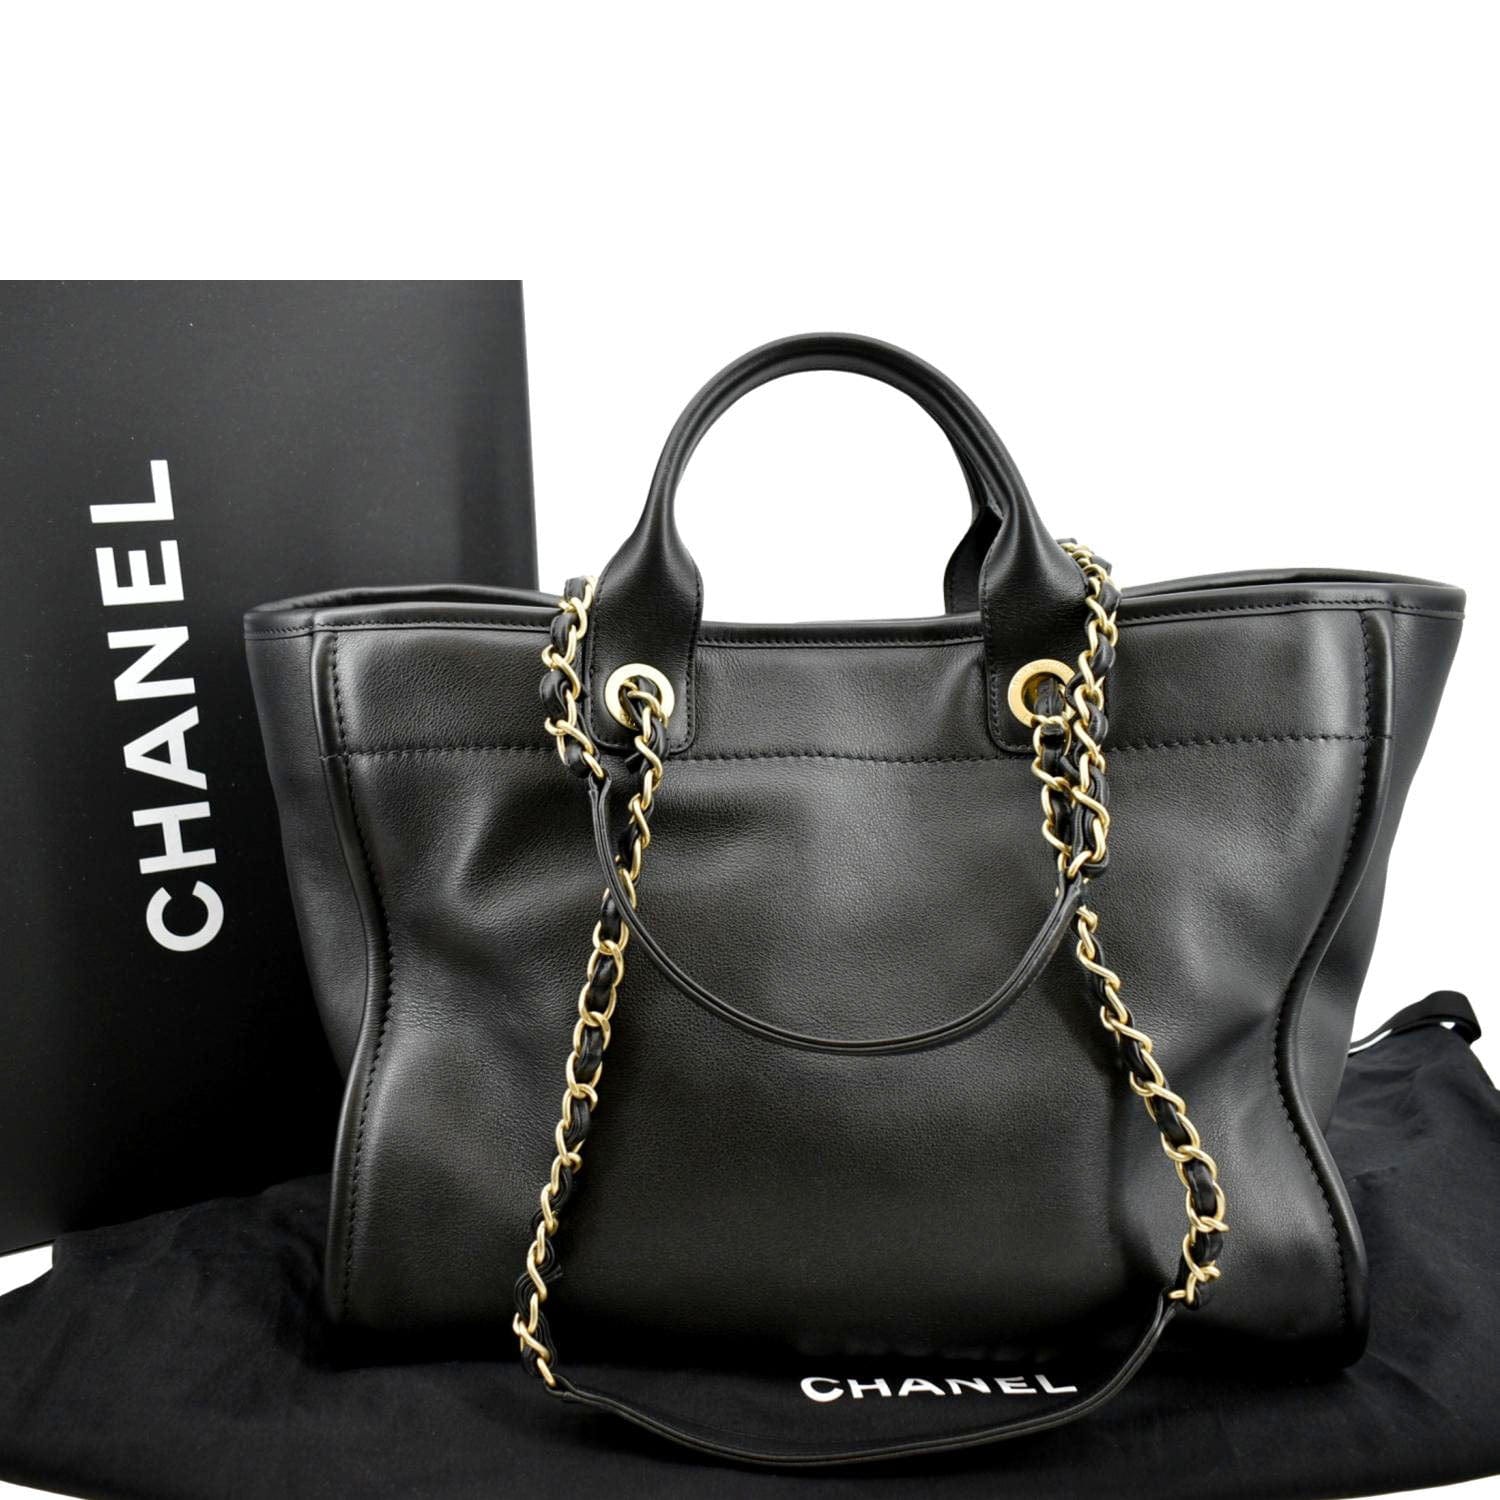 Deauville leather tote